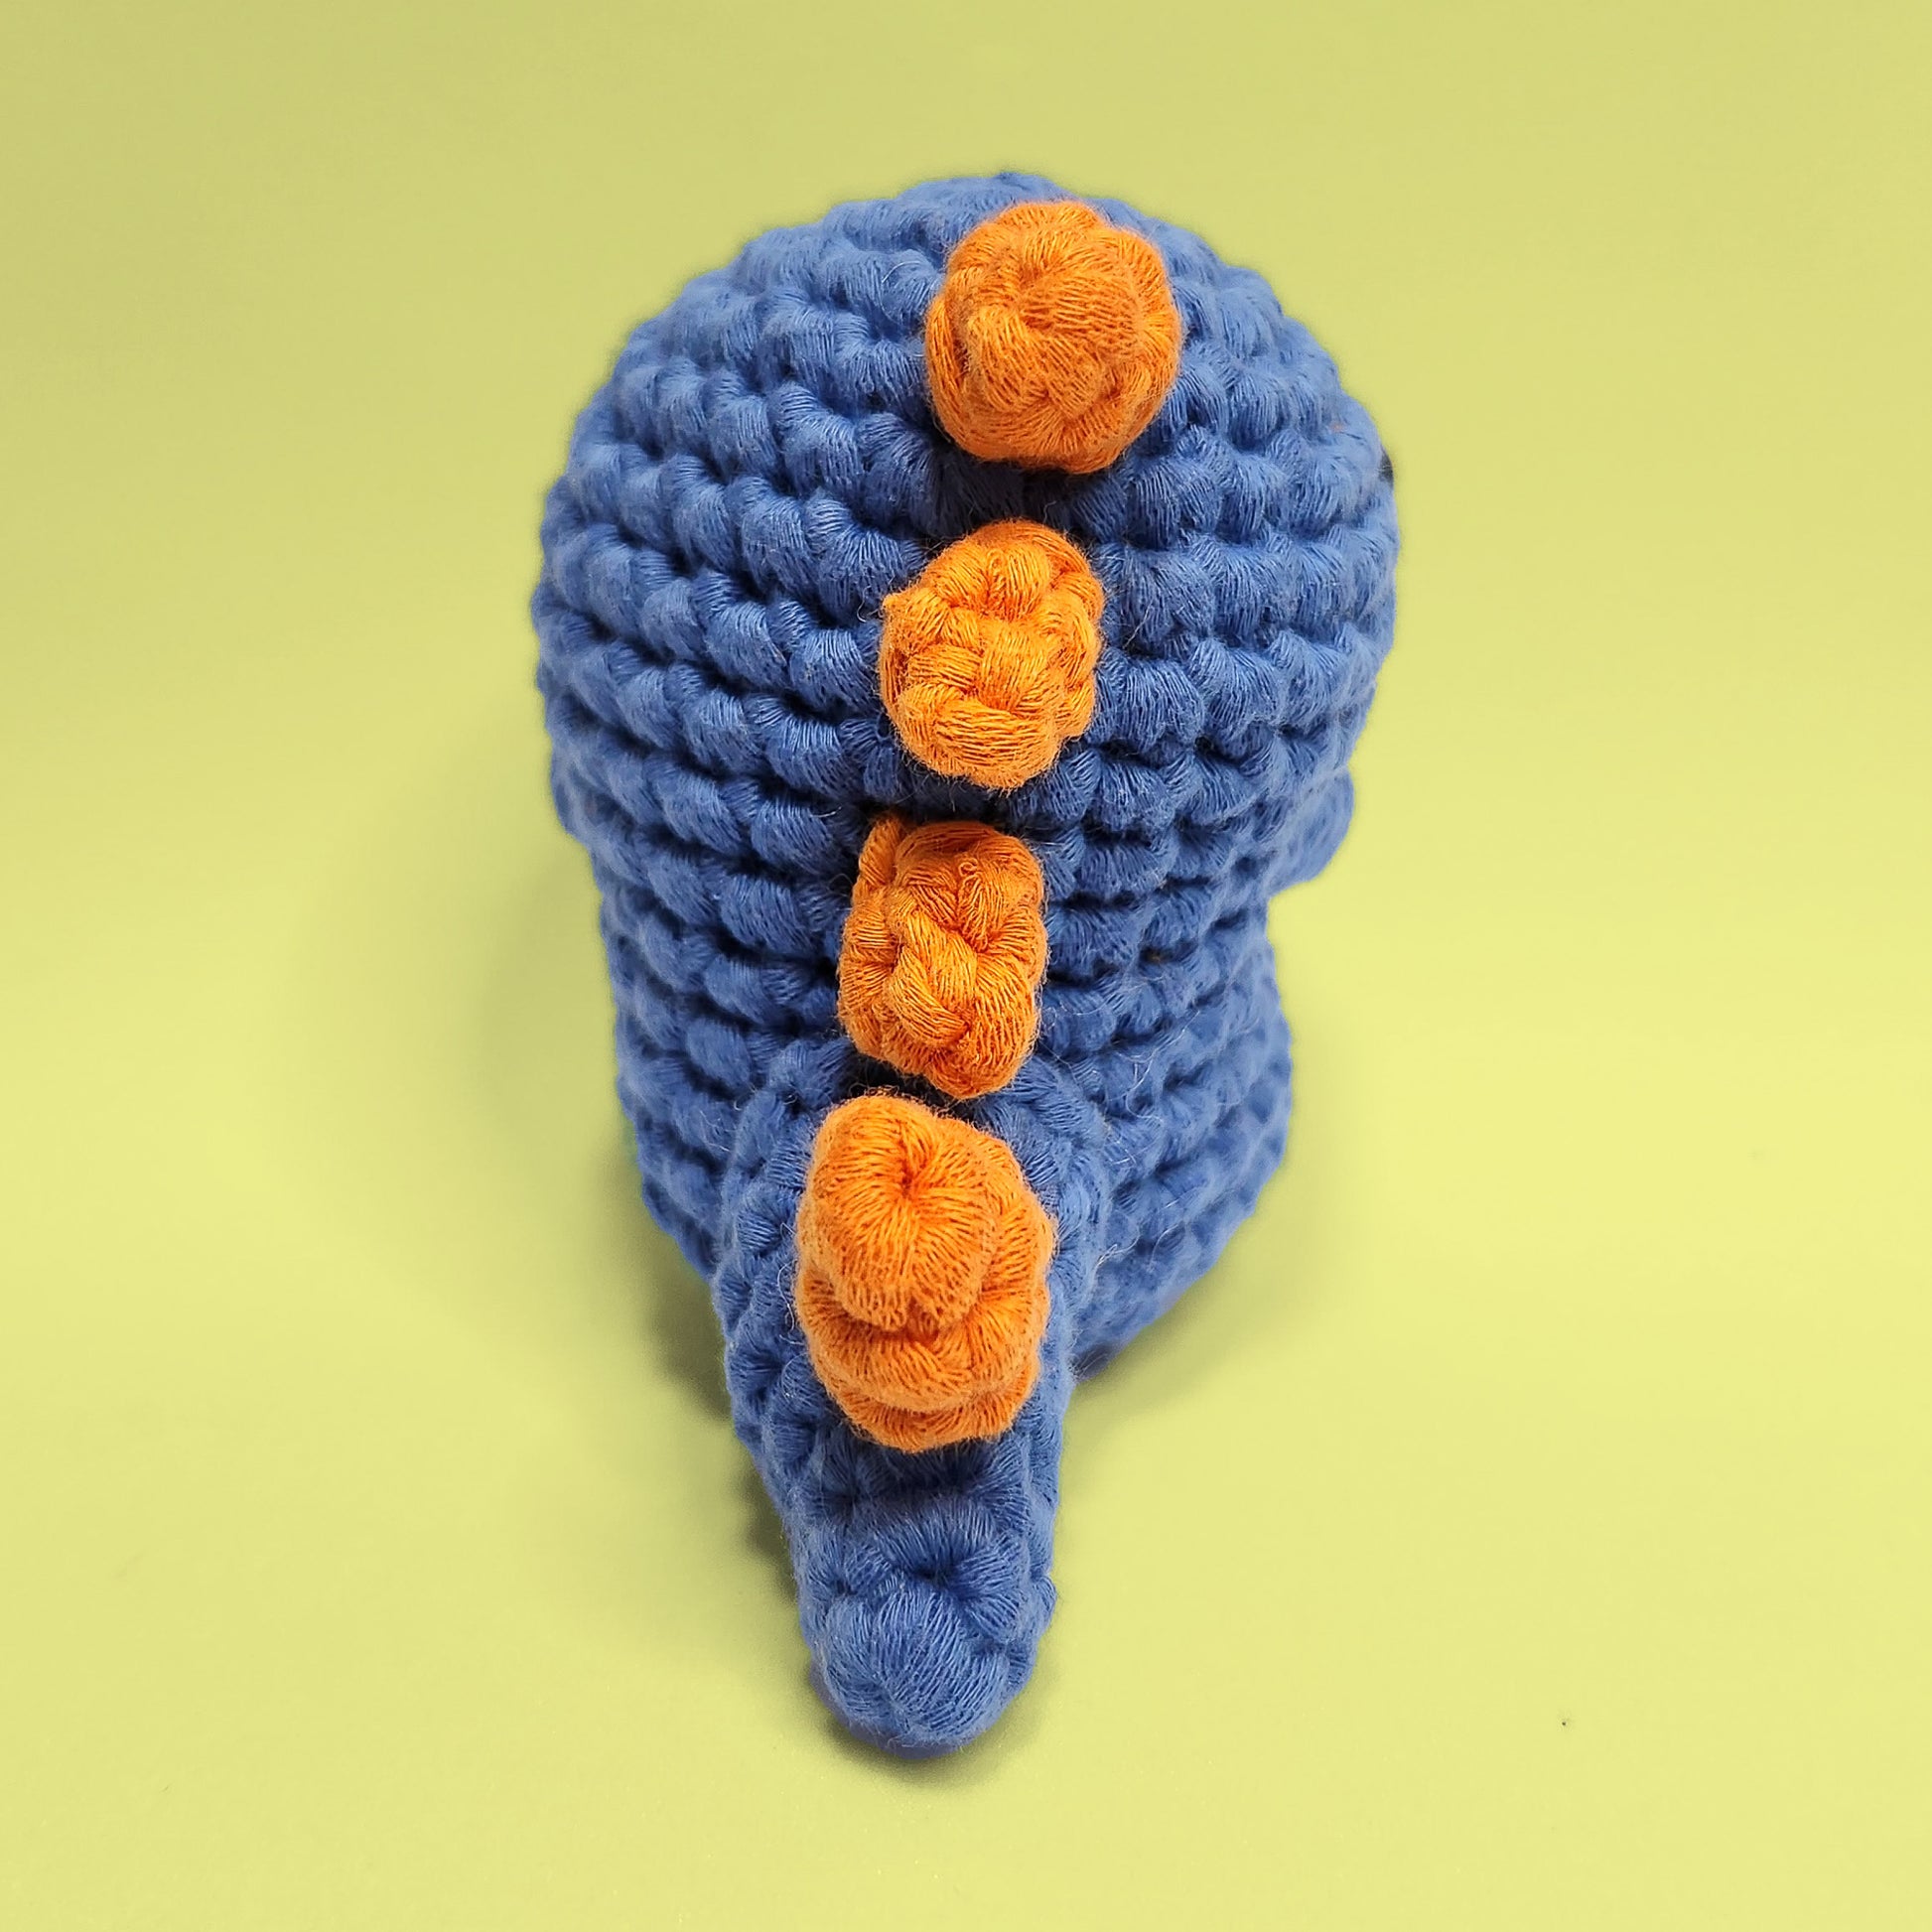 Blue dinosaur crochet amigurumi with a bulging stomach and orange spikes on the back. Handcrafted from our beginner friendly kit, this unique dinosaur is a fun and engaging project for crochet enthusiasts. Back view.